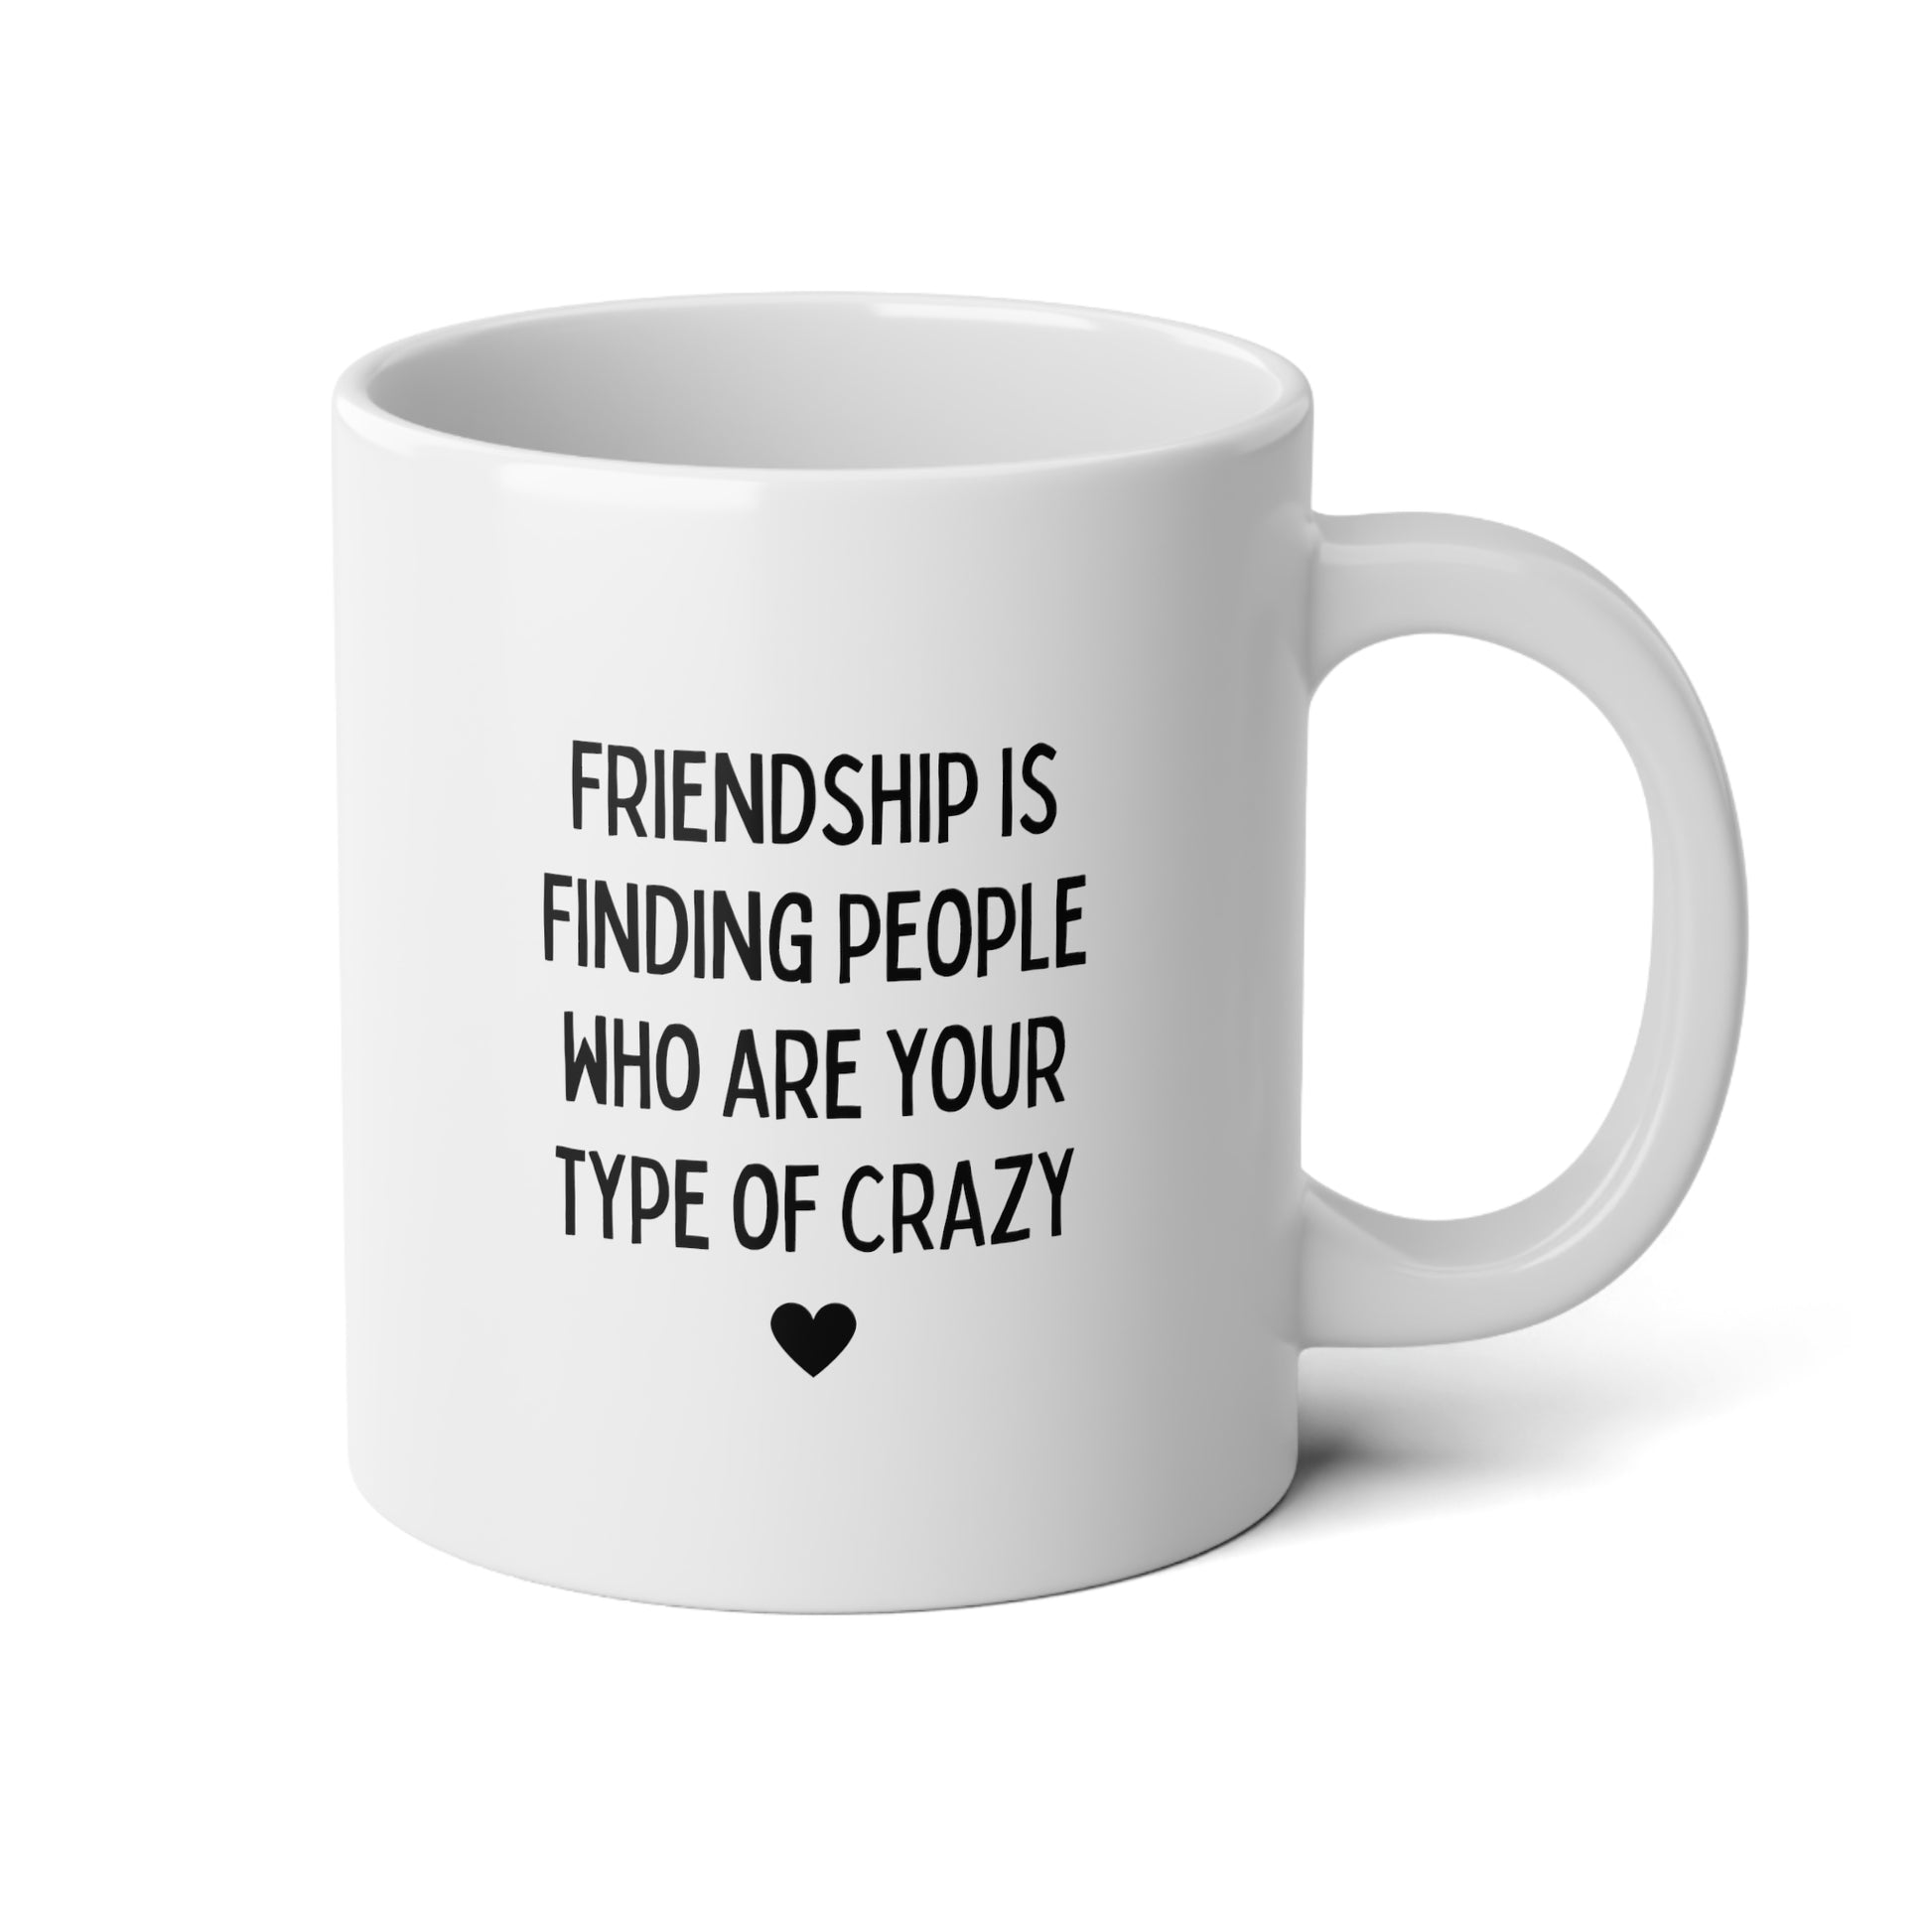 Friendship Is Finding People Who Are Your Type Of Crazy 20oz white funny large coffee mug gift for best friend friendship decor BFF Bestie tea cup waveywares wavey wares wavywares wavy wares